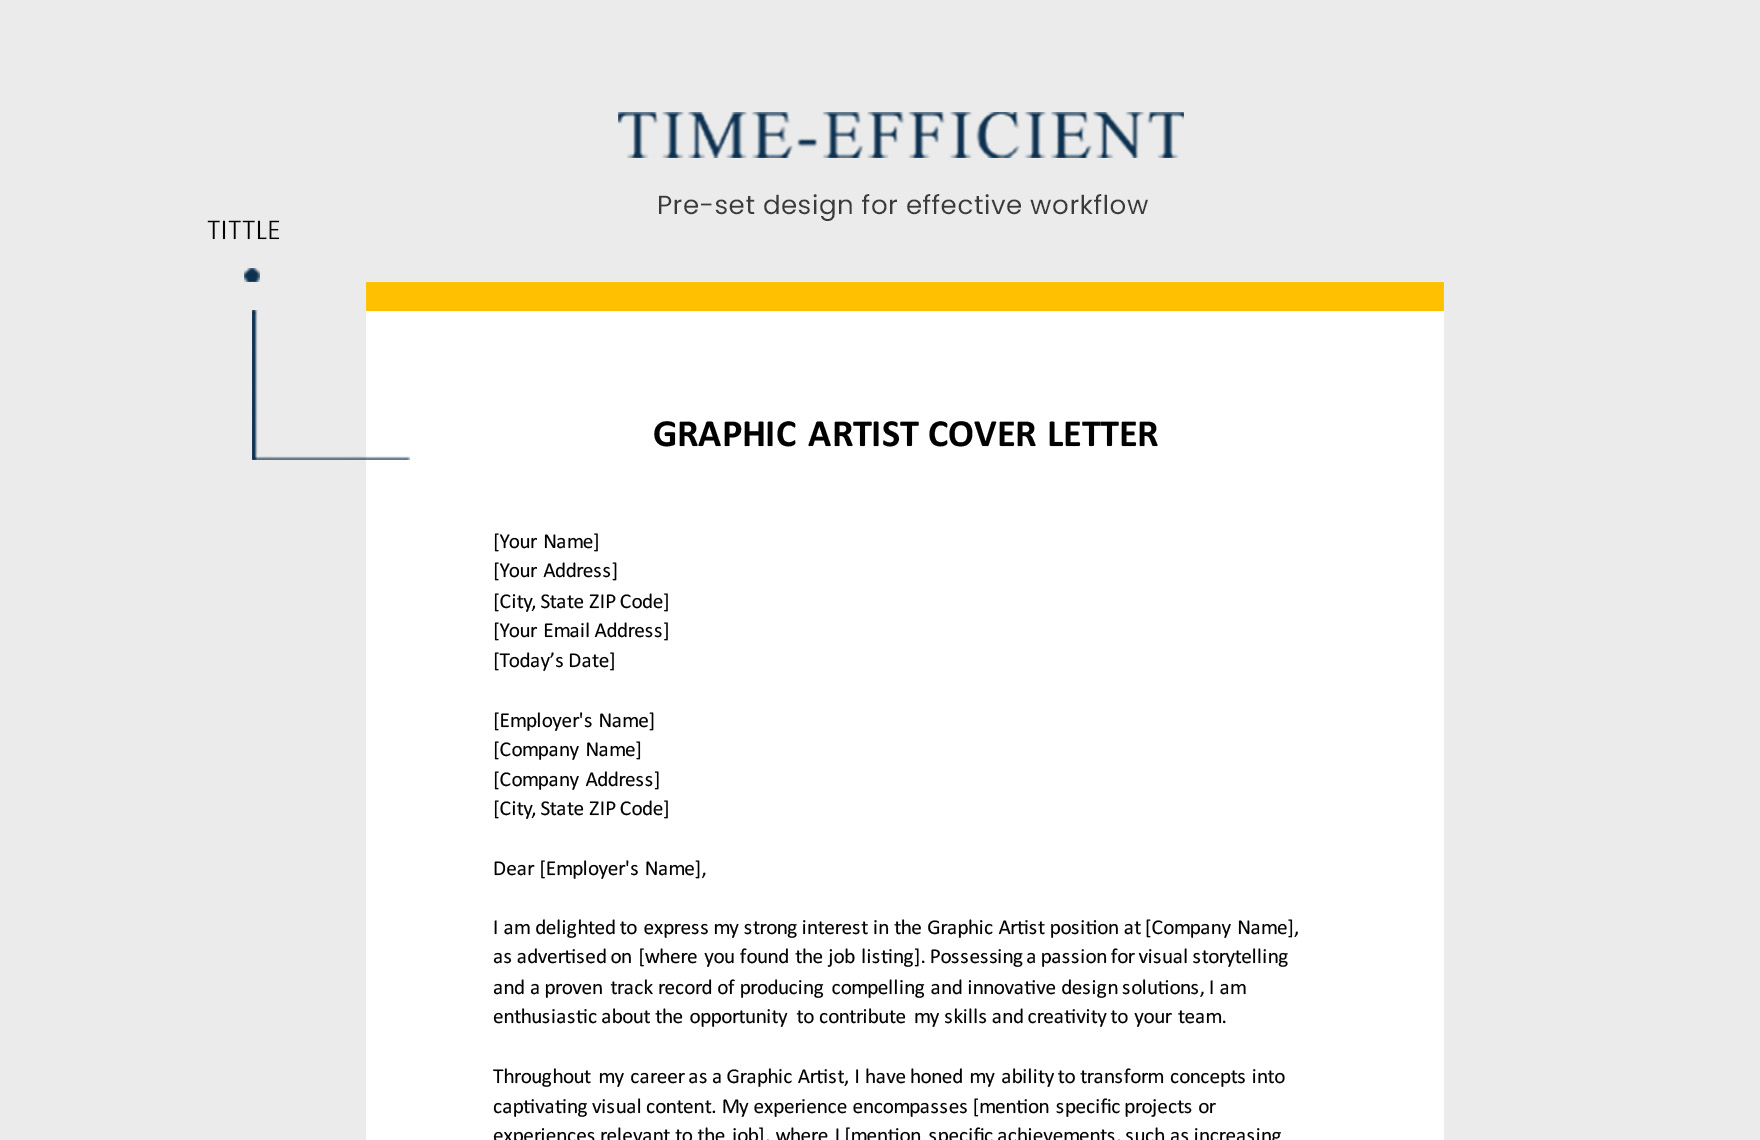 Graphic Artist Cover Letter